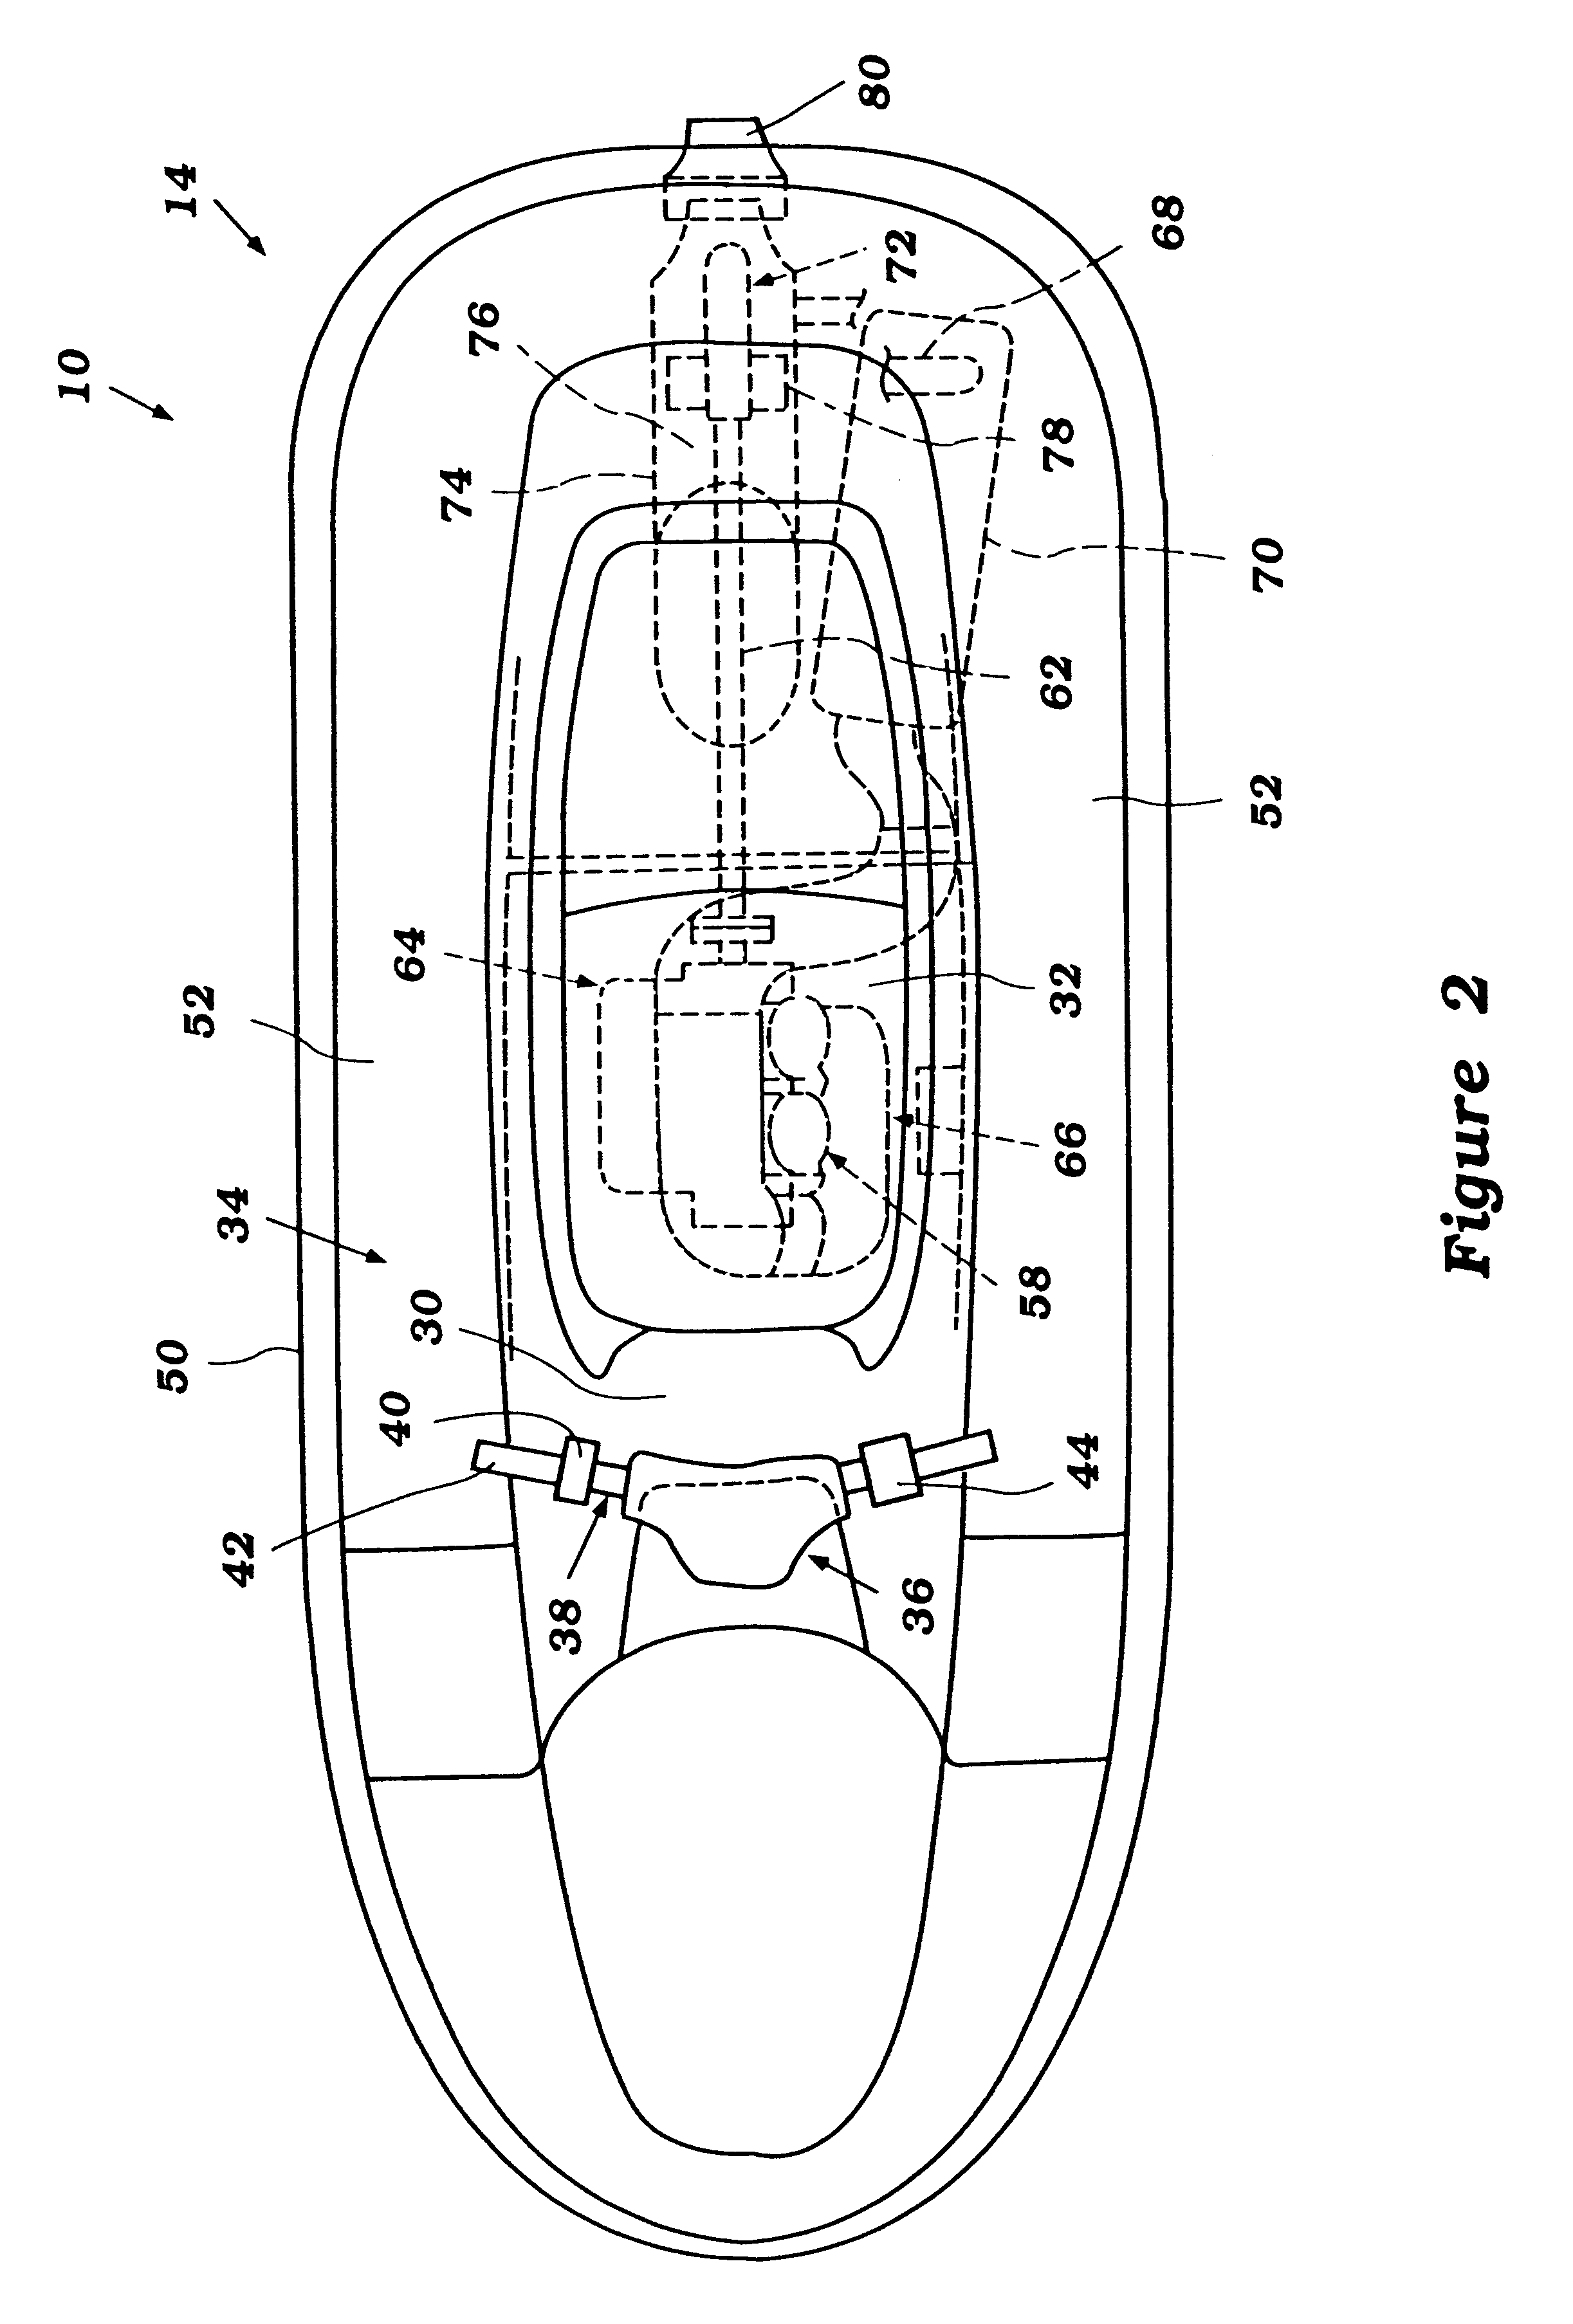 Steering control for watercraft